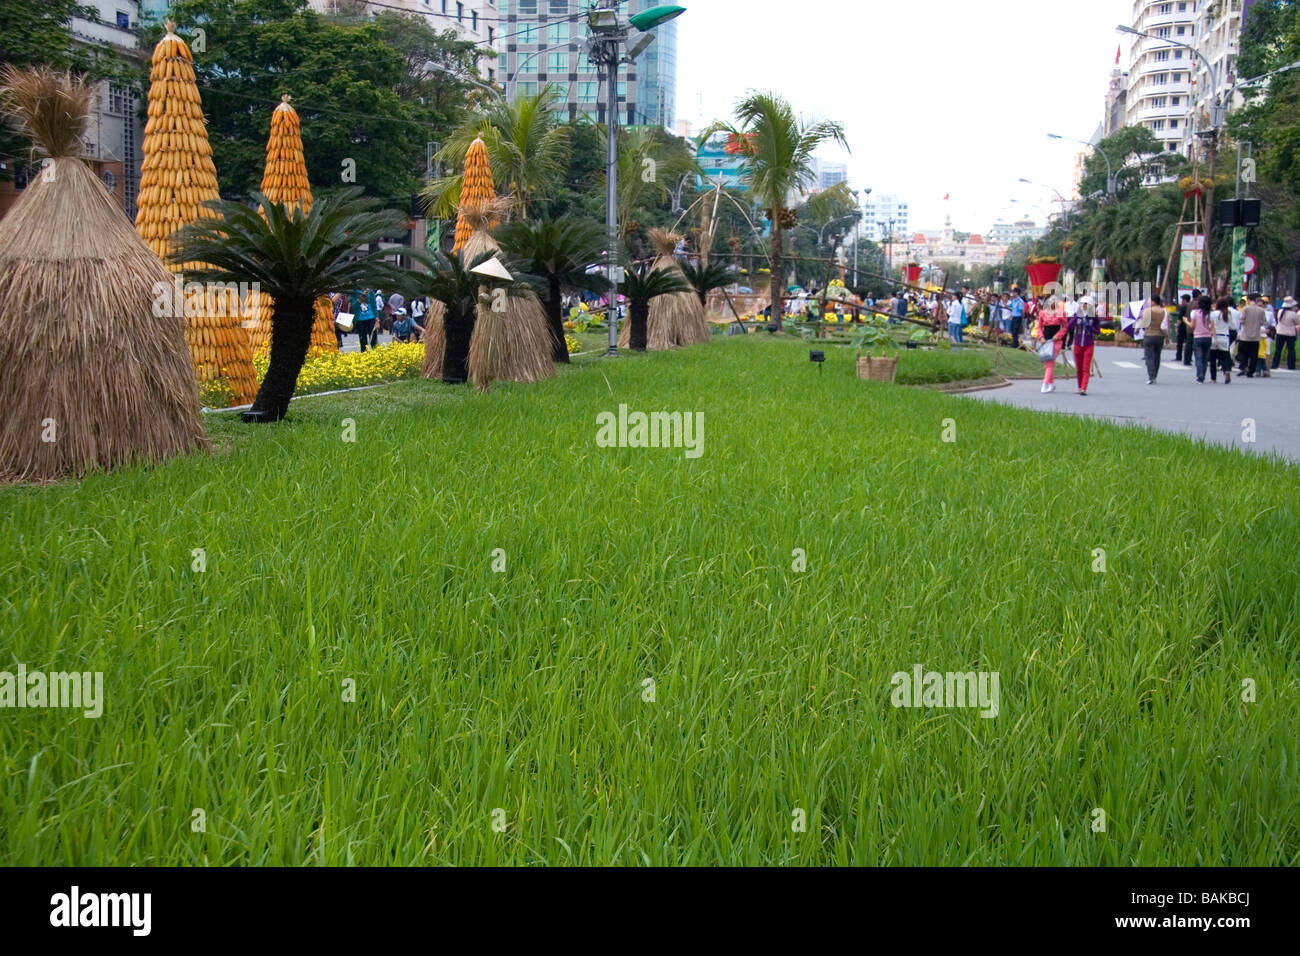 Rice paddie landscaping is part of the Tet Lunar New Year celebration in Ho Chi Minh City Vietnam Stock Photo